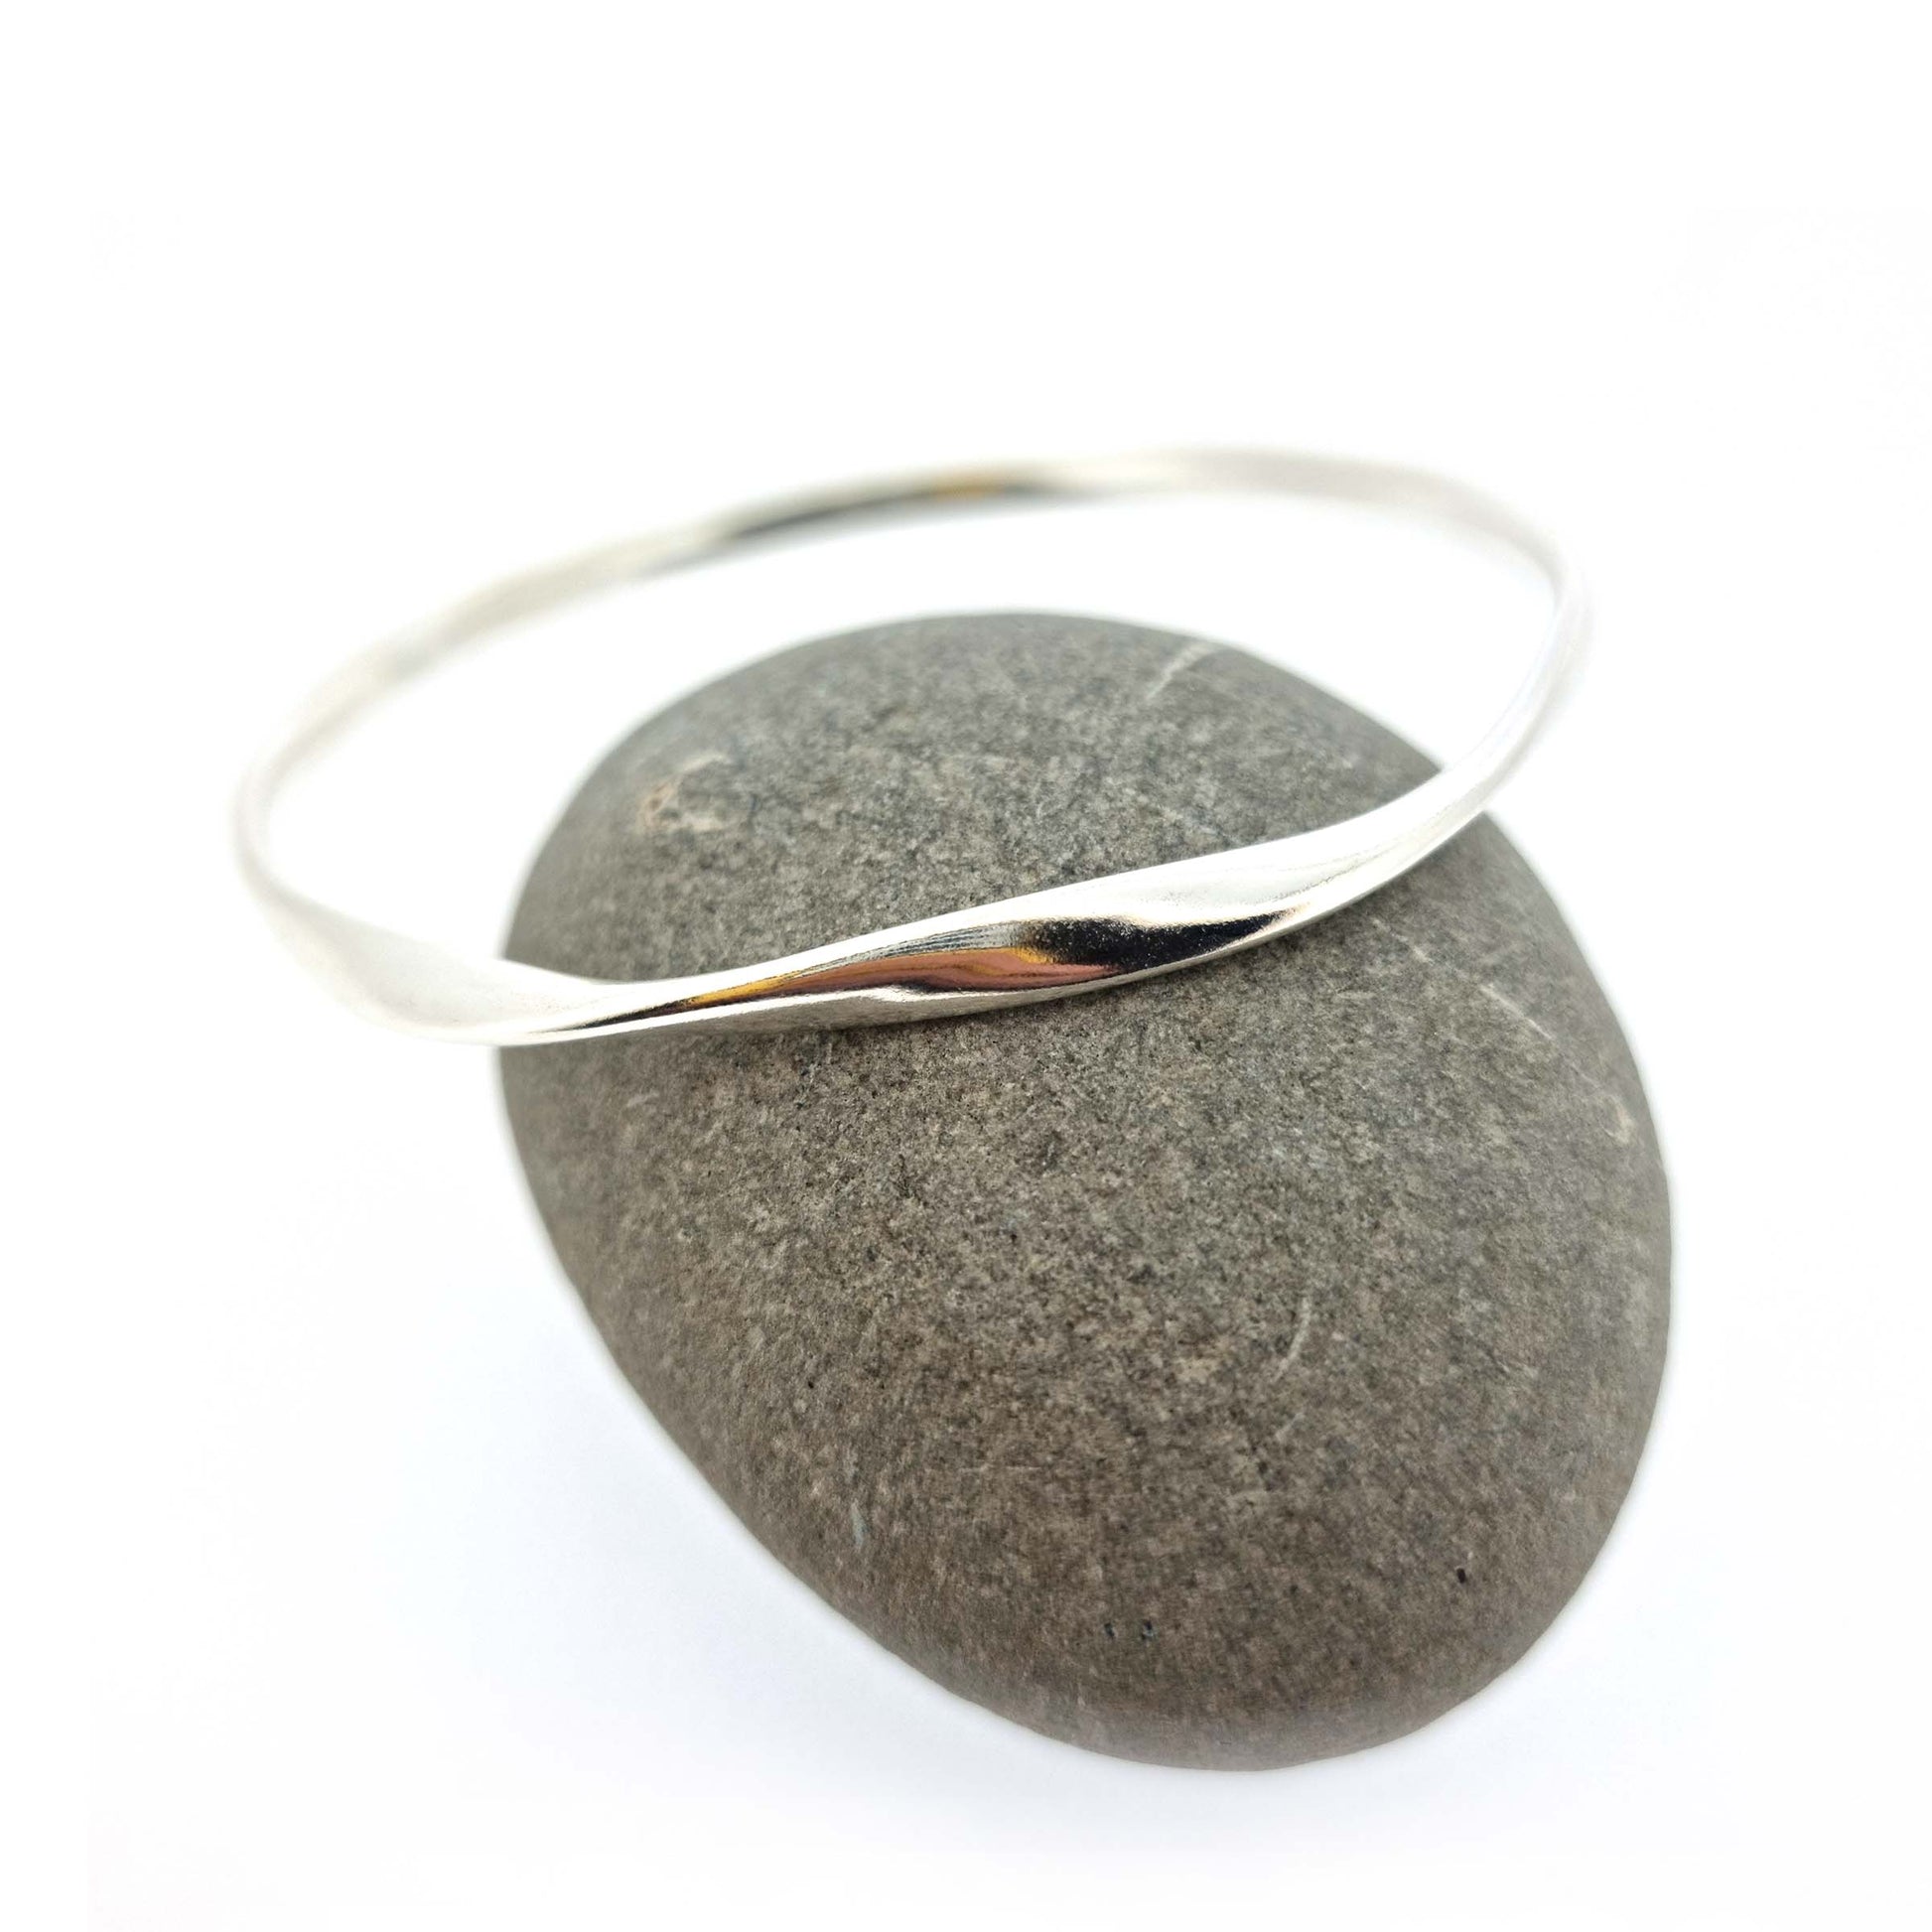 Round silver bangle with oval profile and a twist in one part. Pictured leaning on a pebble.